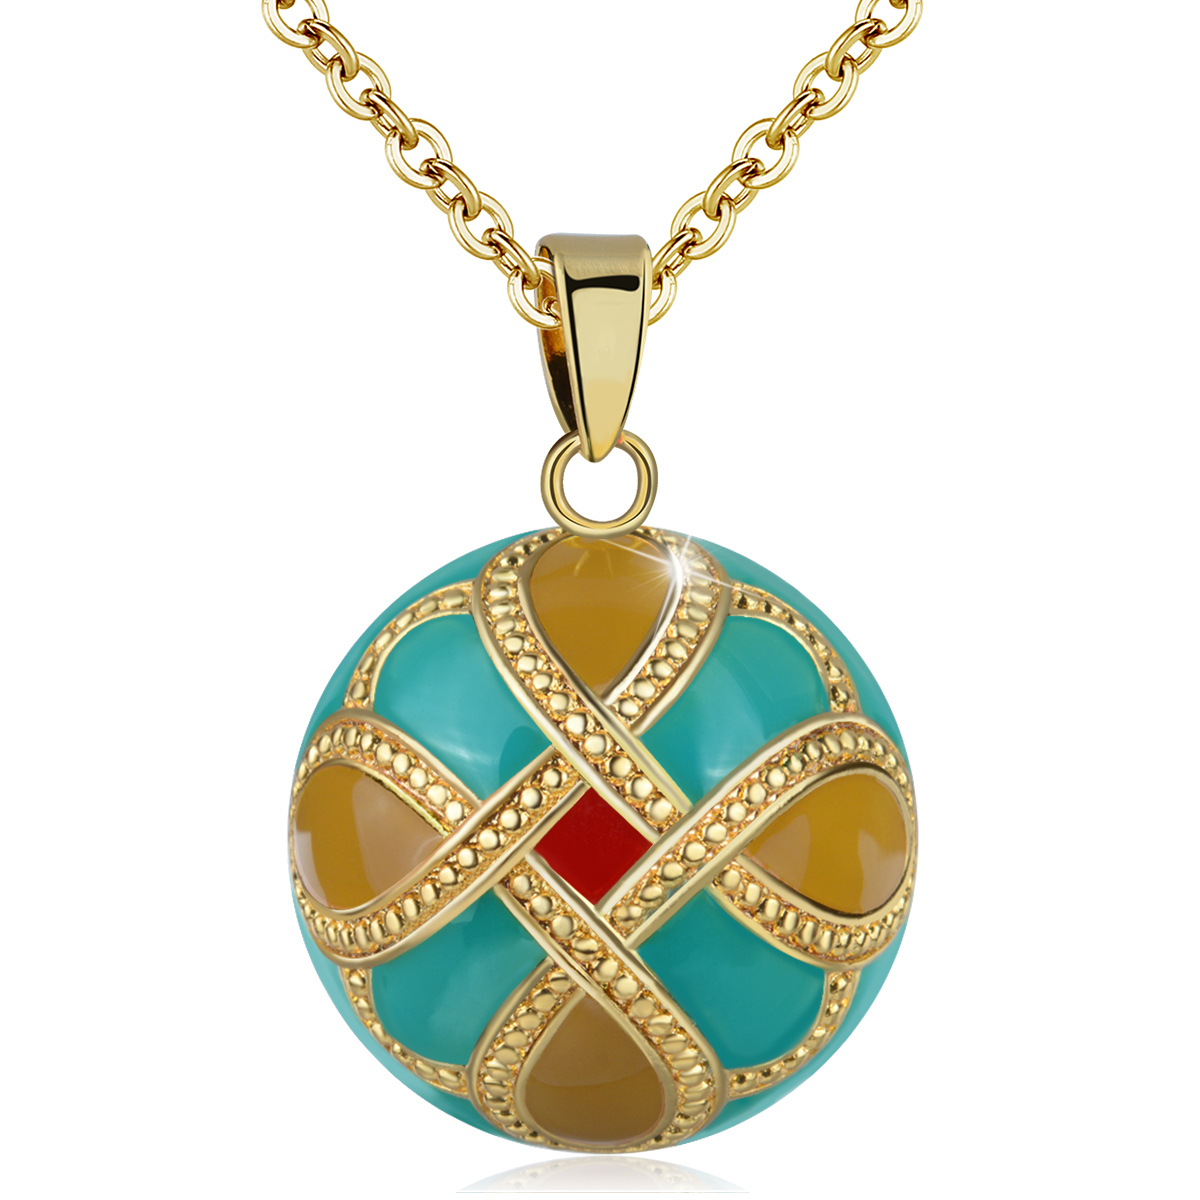 Merryshine Jewelry Gold Bola Harmony Ball Angel Chime Caller Charm Mexican Pendant Necklace